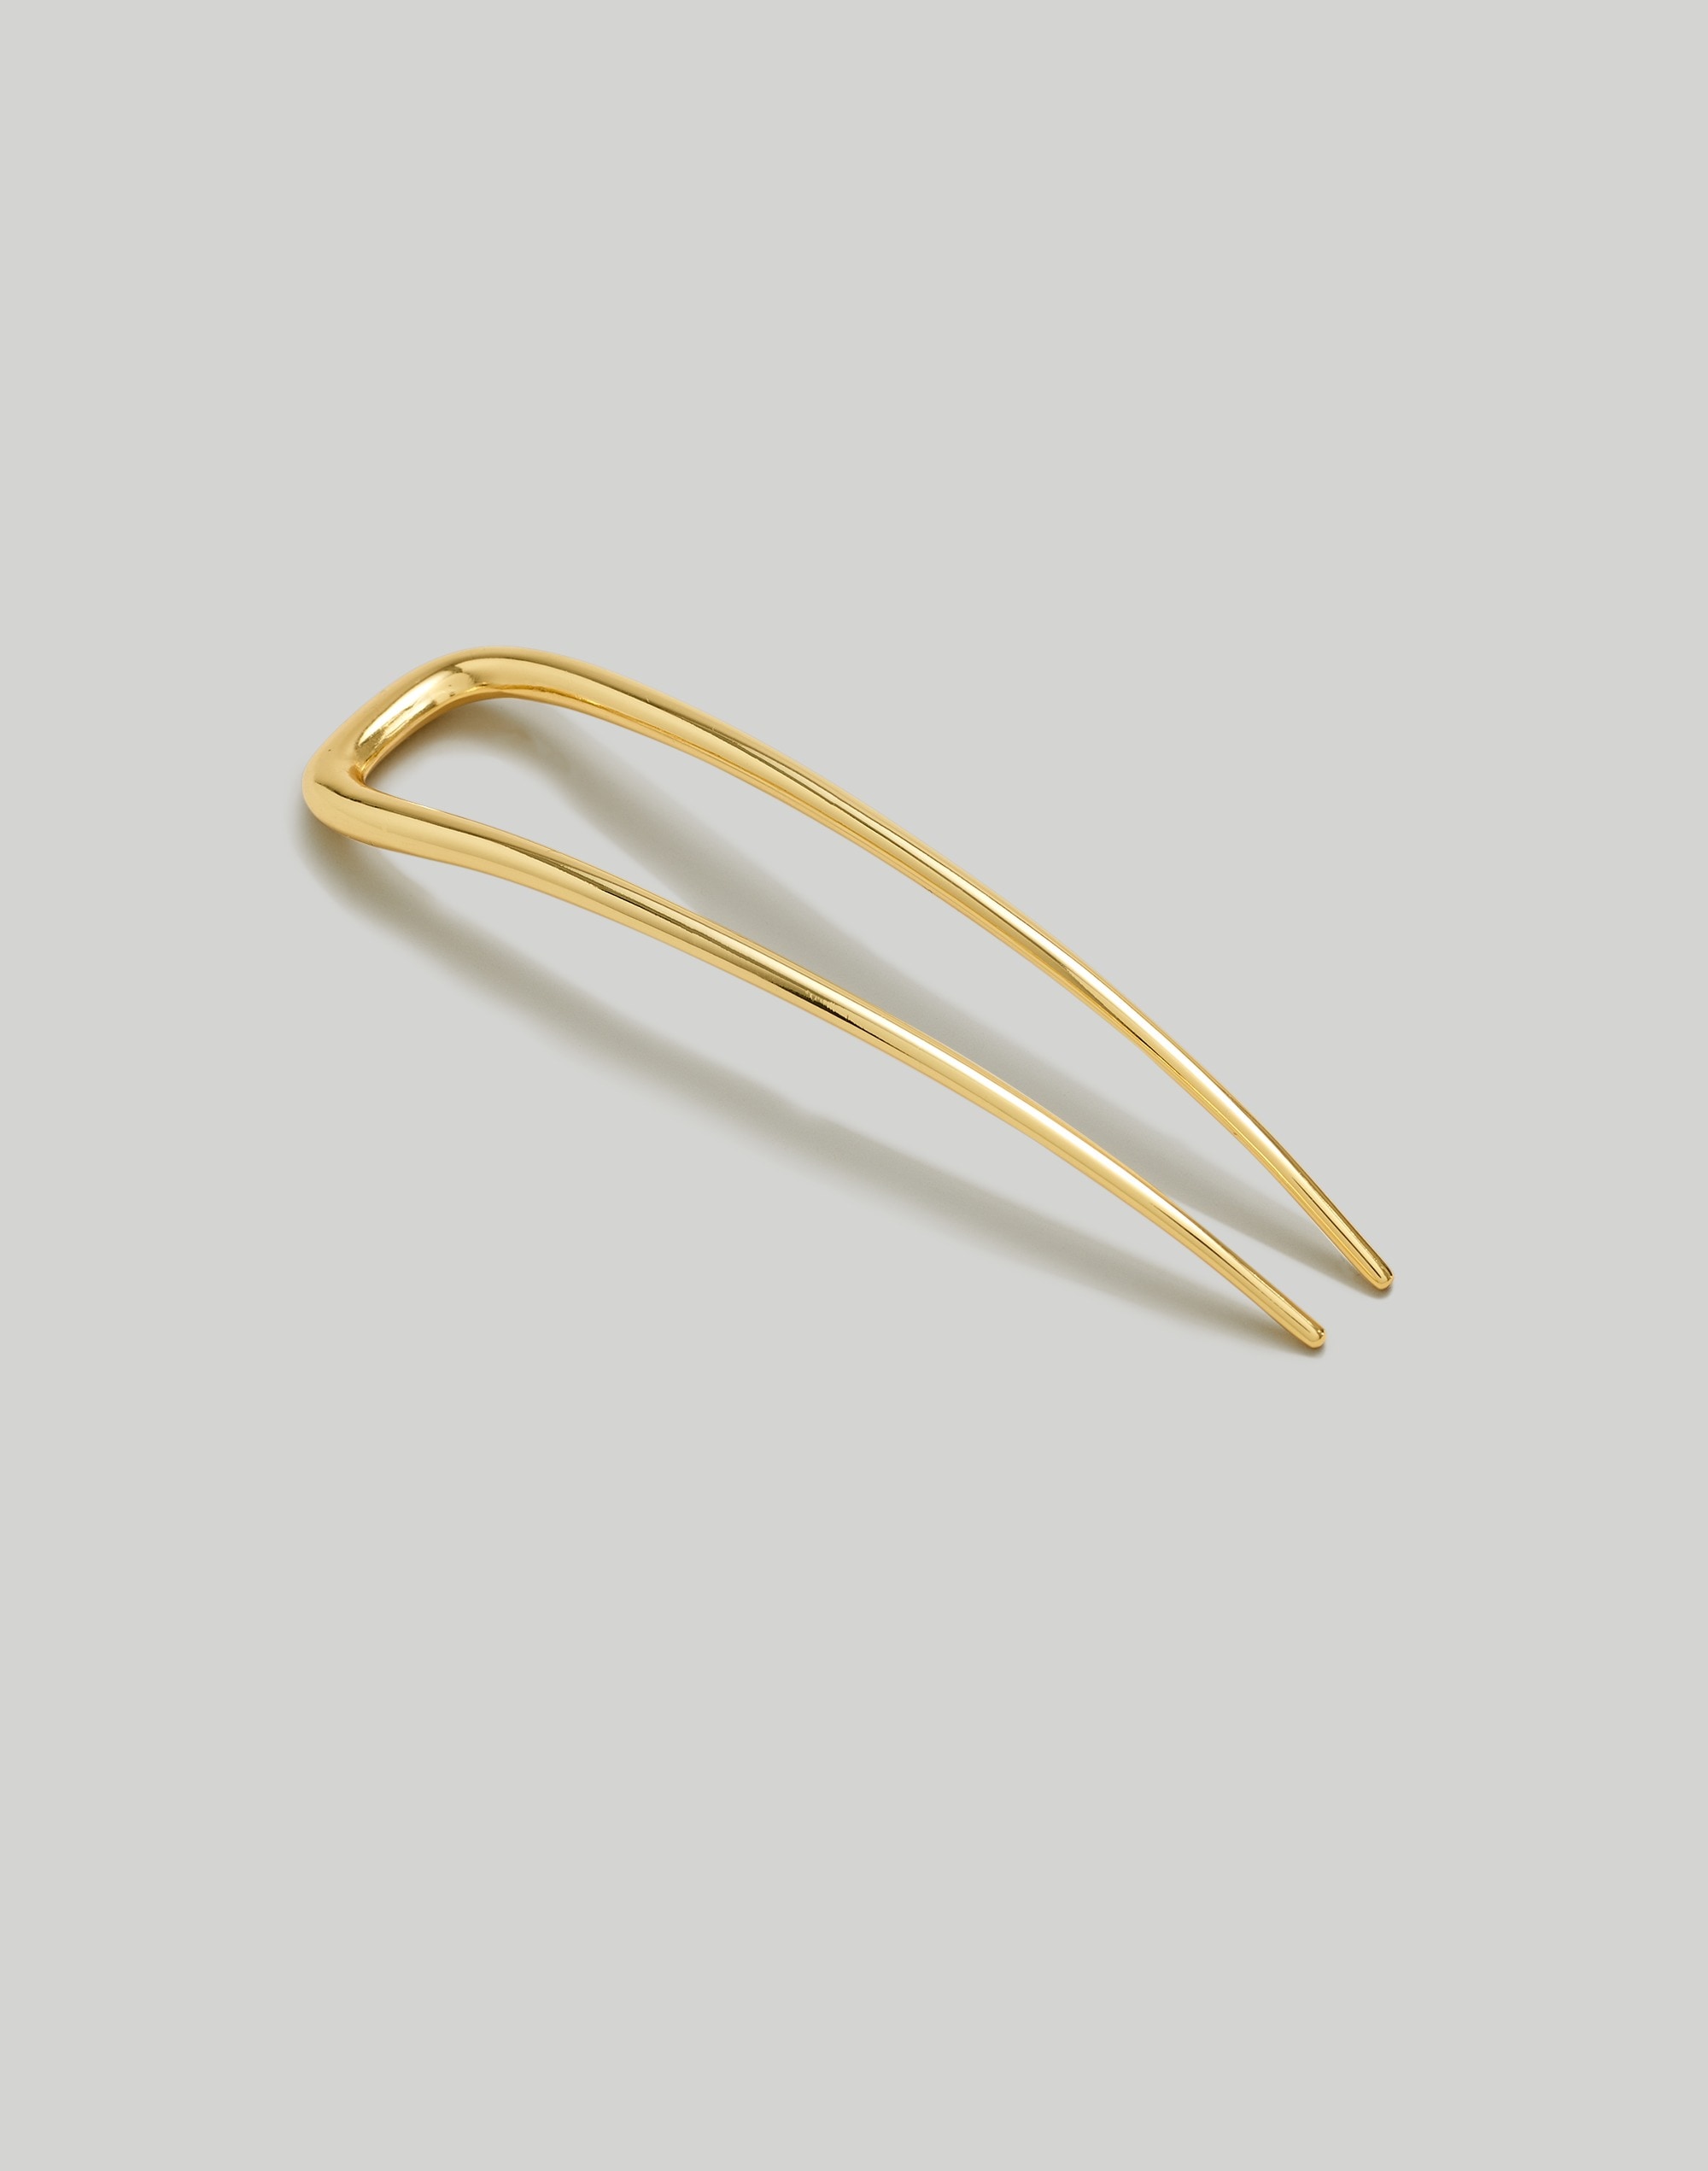 French Hair Pin | Madewell